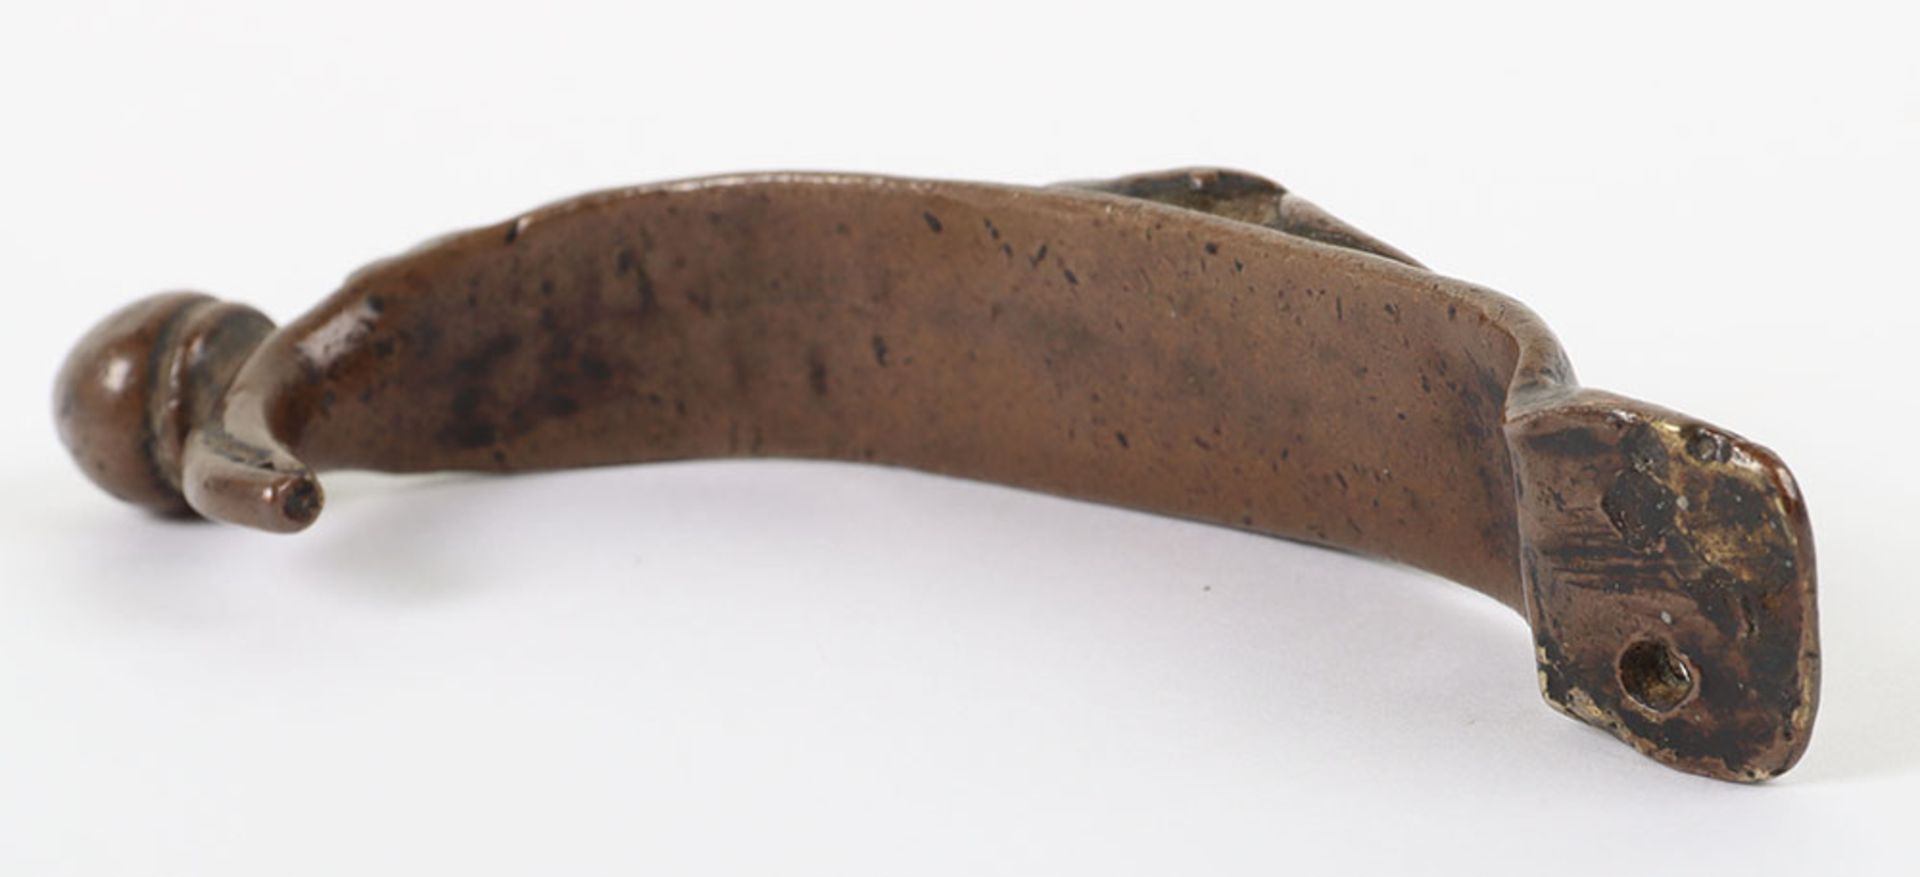 Copper Handle from an Early Indian Dagger Bich’wa, Probably 15th Century - Image 3 of 6